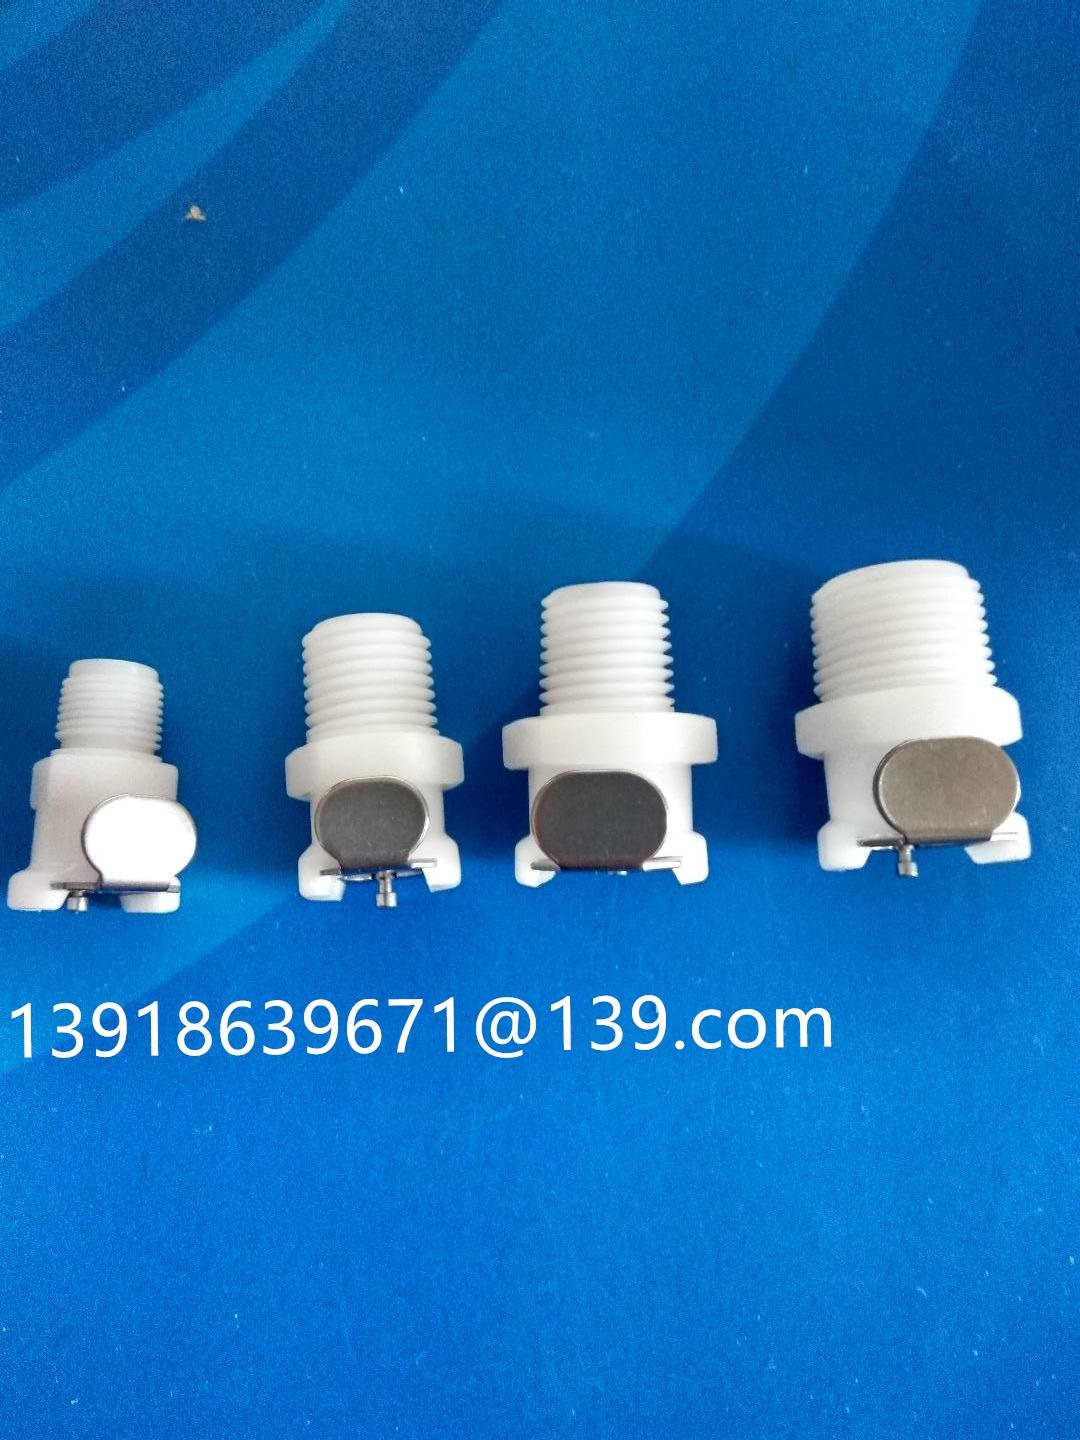 PMCD1004Plastic Connectors, Couplings and Fittings